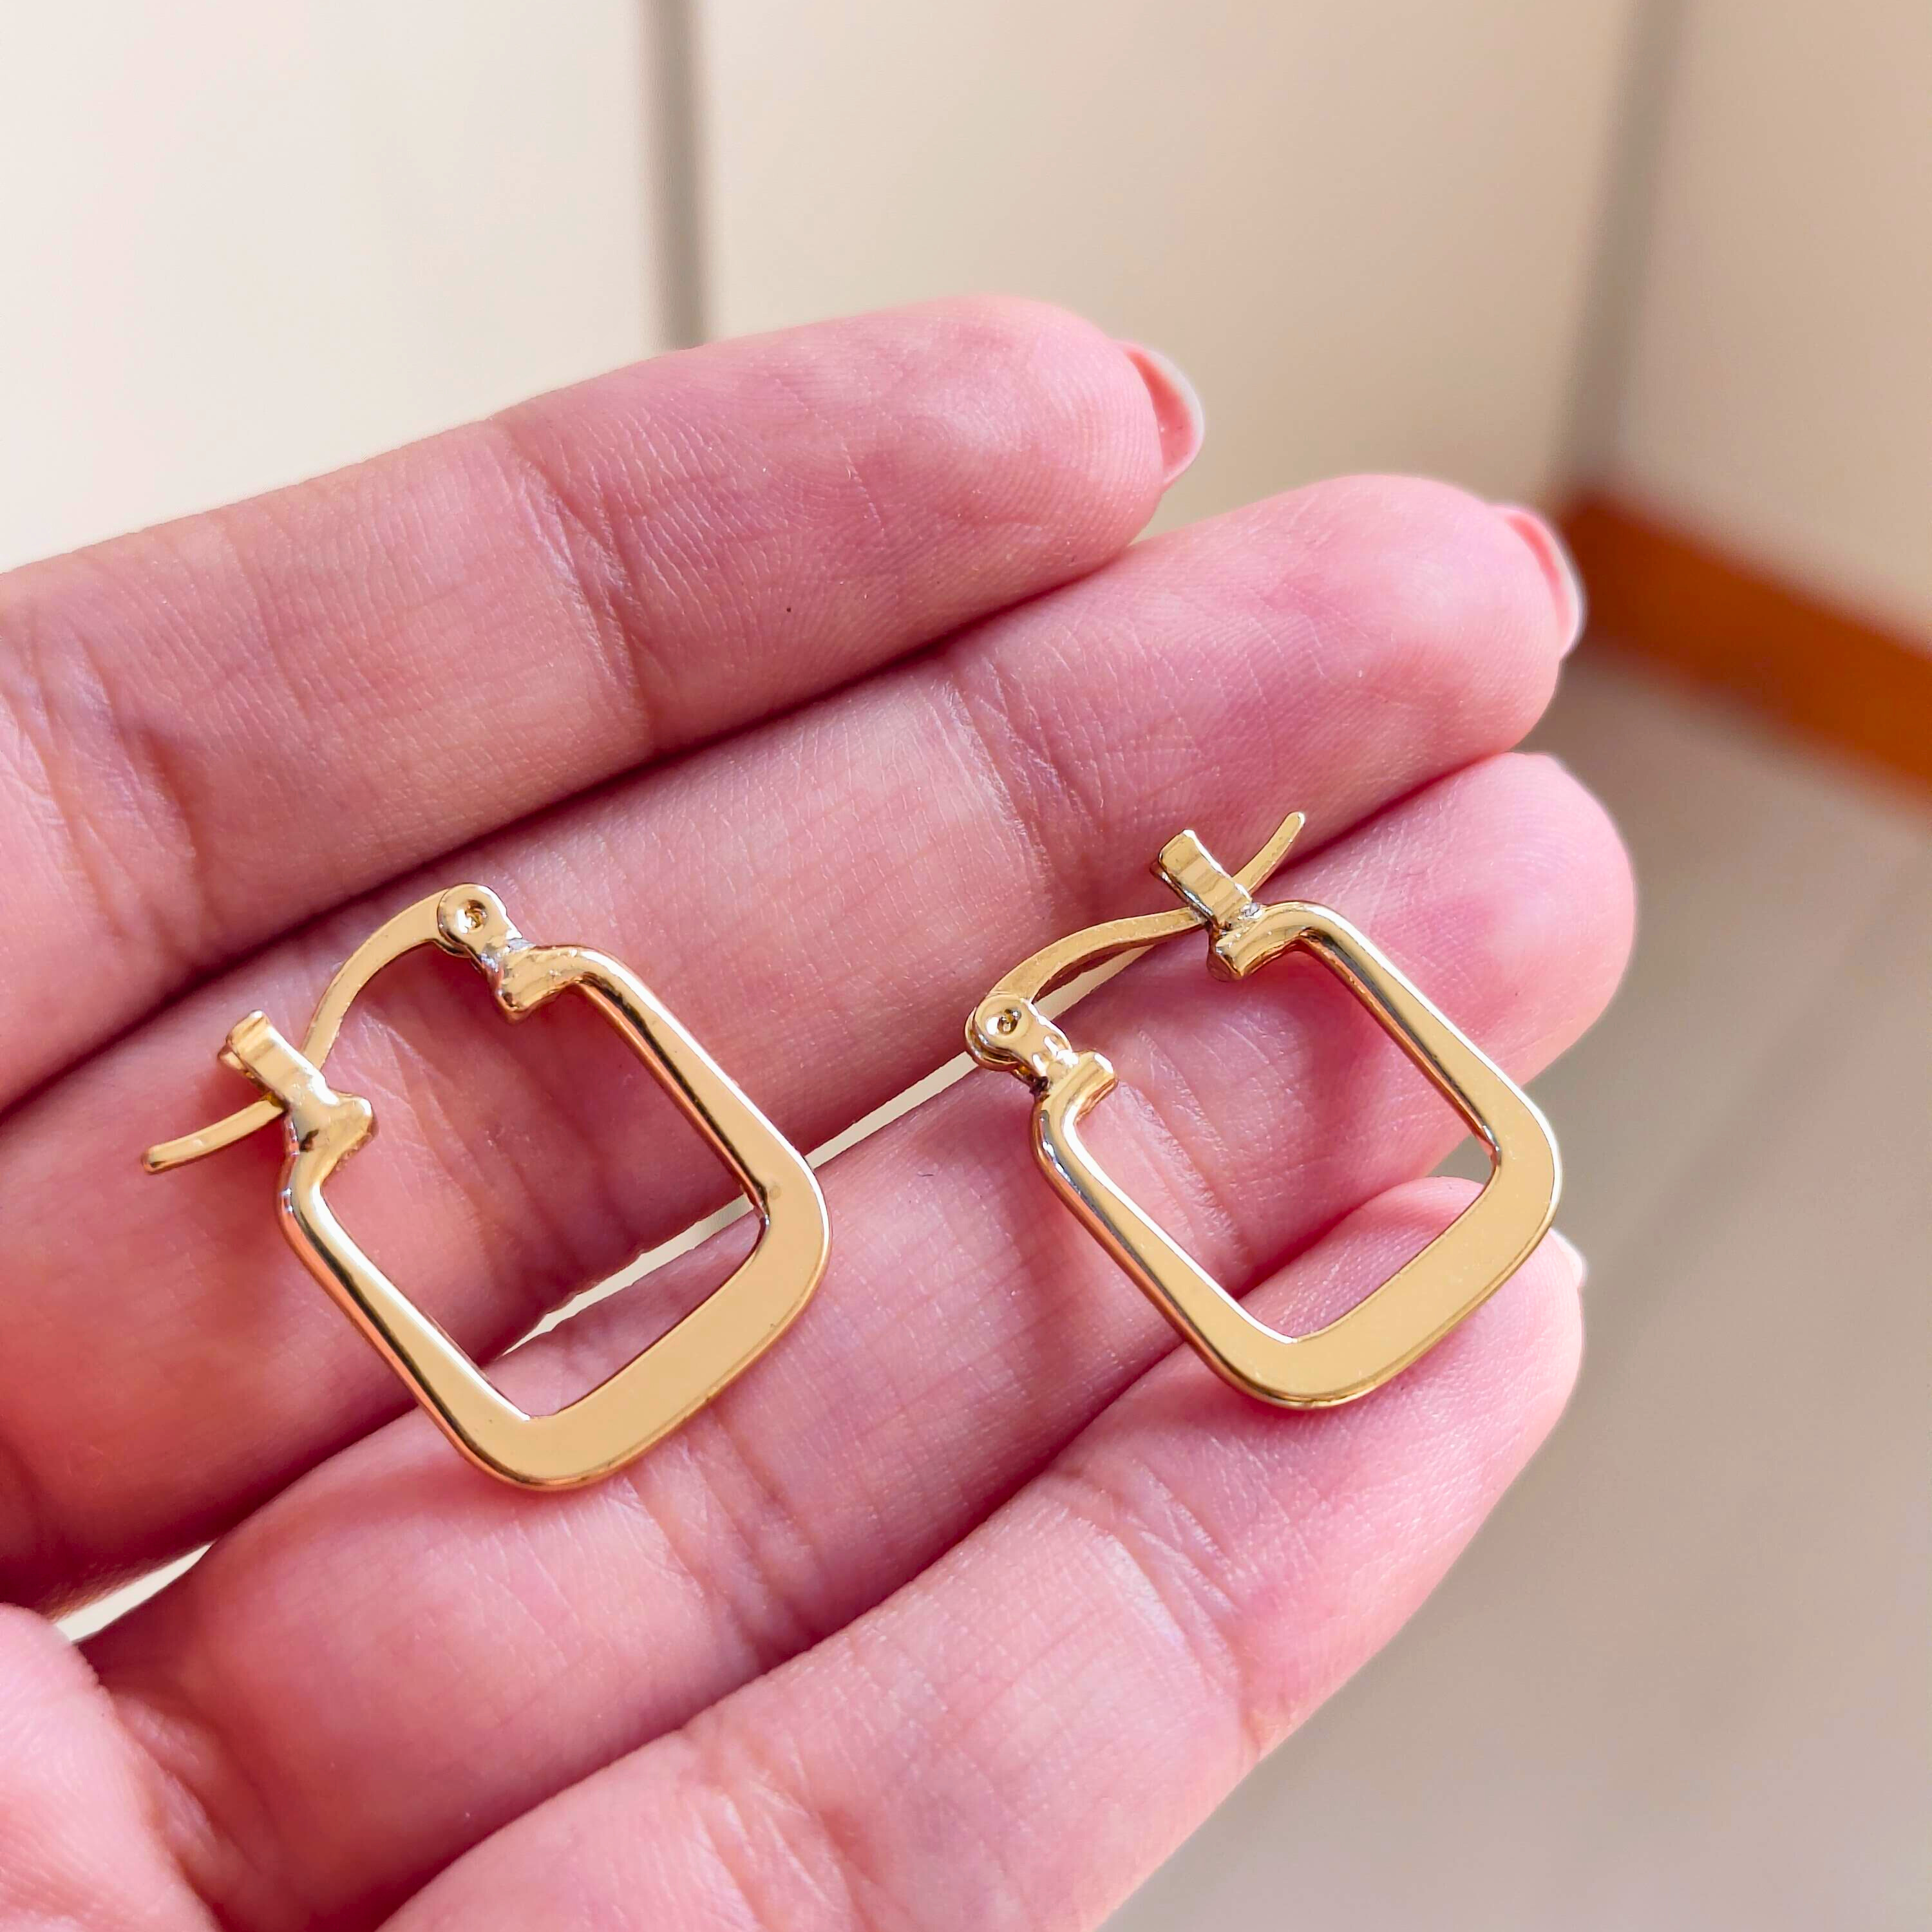 TFC Squared Honey Gold Plated Hoop Earrings-Discover daily wear gold earrings including stud earrings, hoop earrings, and pearl earrings, perfect as earrings for women and earrings for girls.Find the cheapest fashion jewellery which is anti-tarnish only at The Fun company.